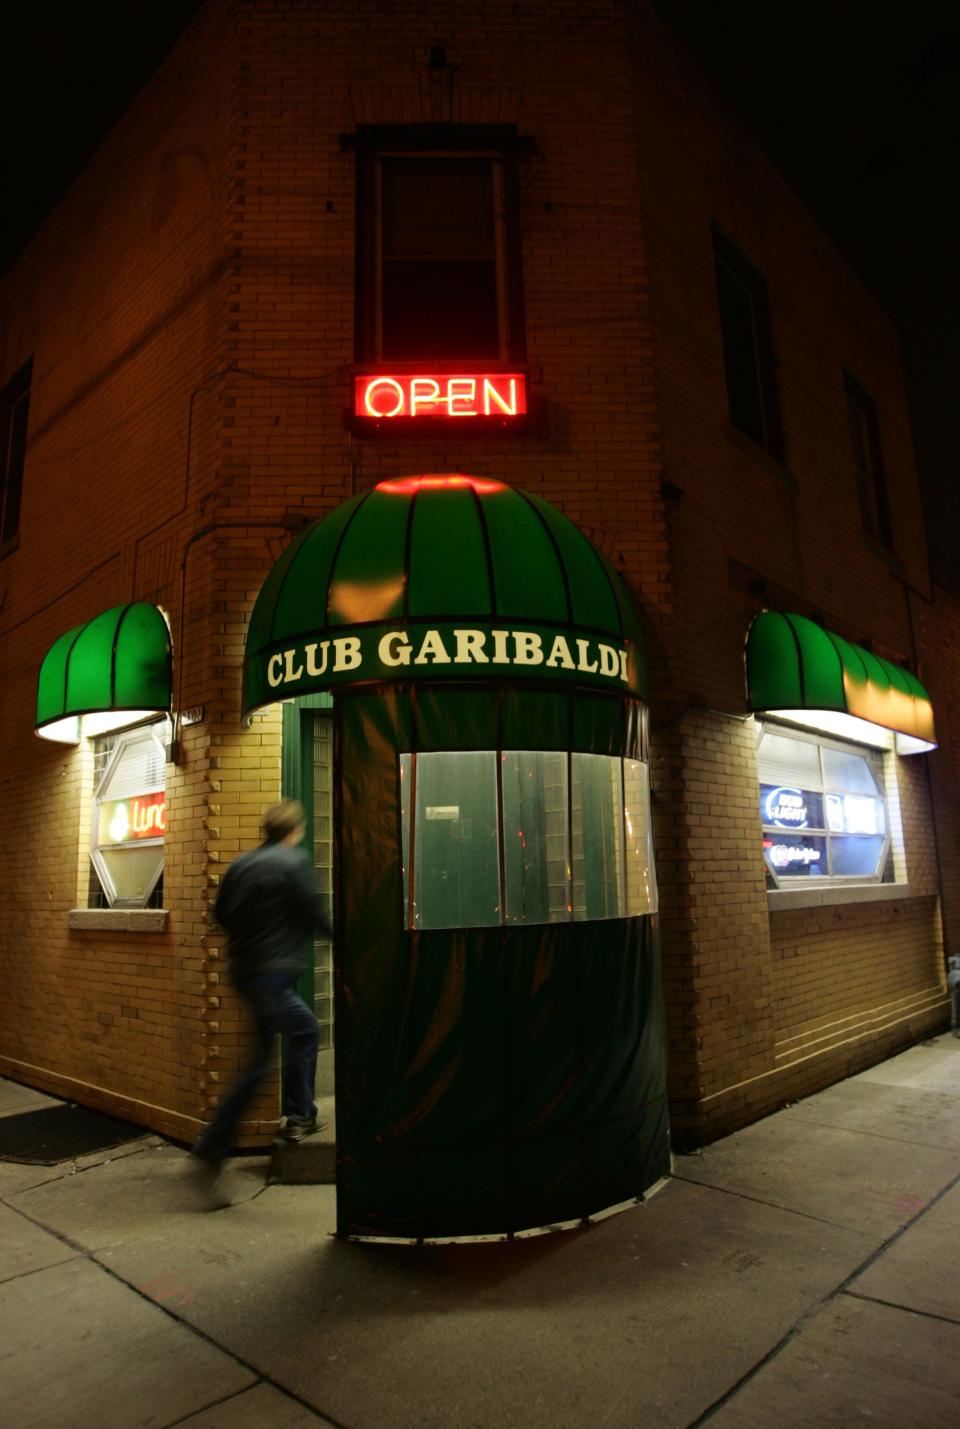 Club Garibaldi, shown in a 2006 photo, has been a Bay View mainstay since it opened in 1907.